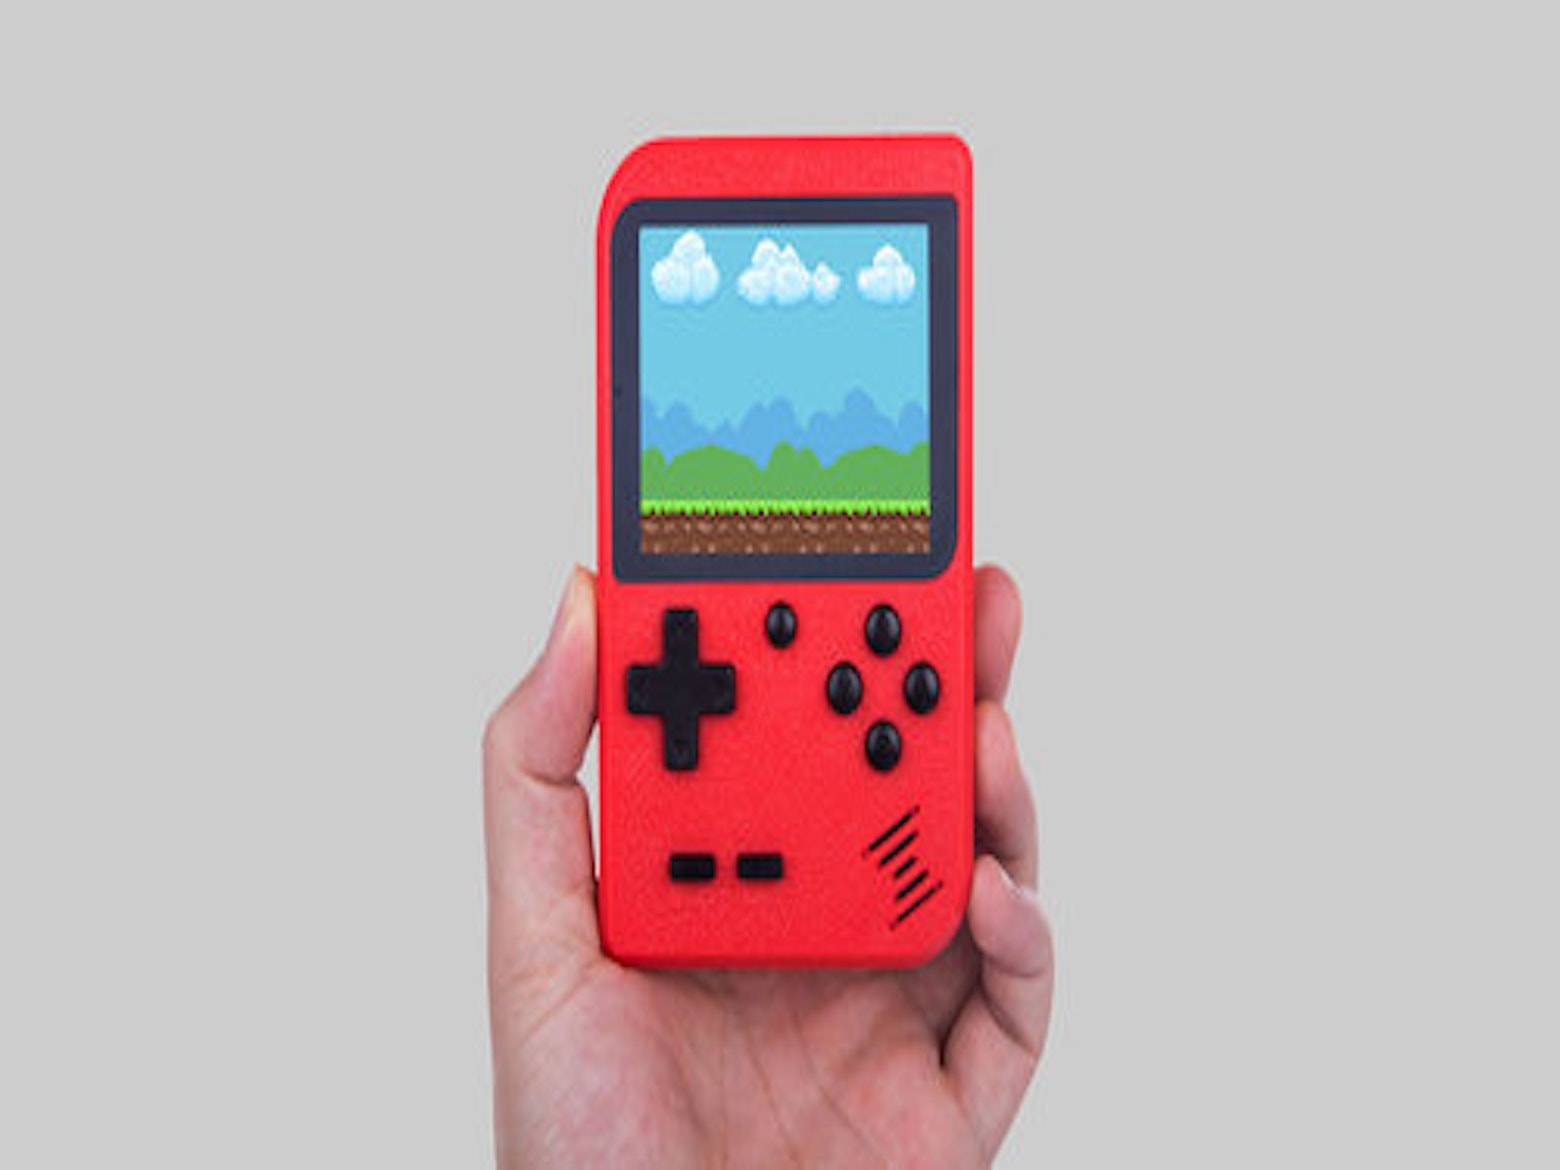 GameBud puts loads of retro games in your palm.